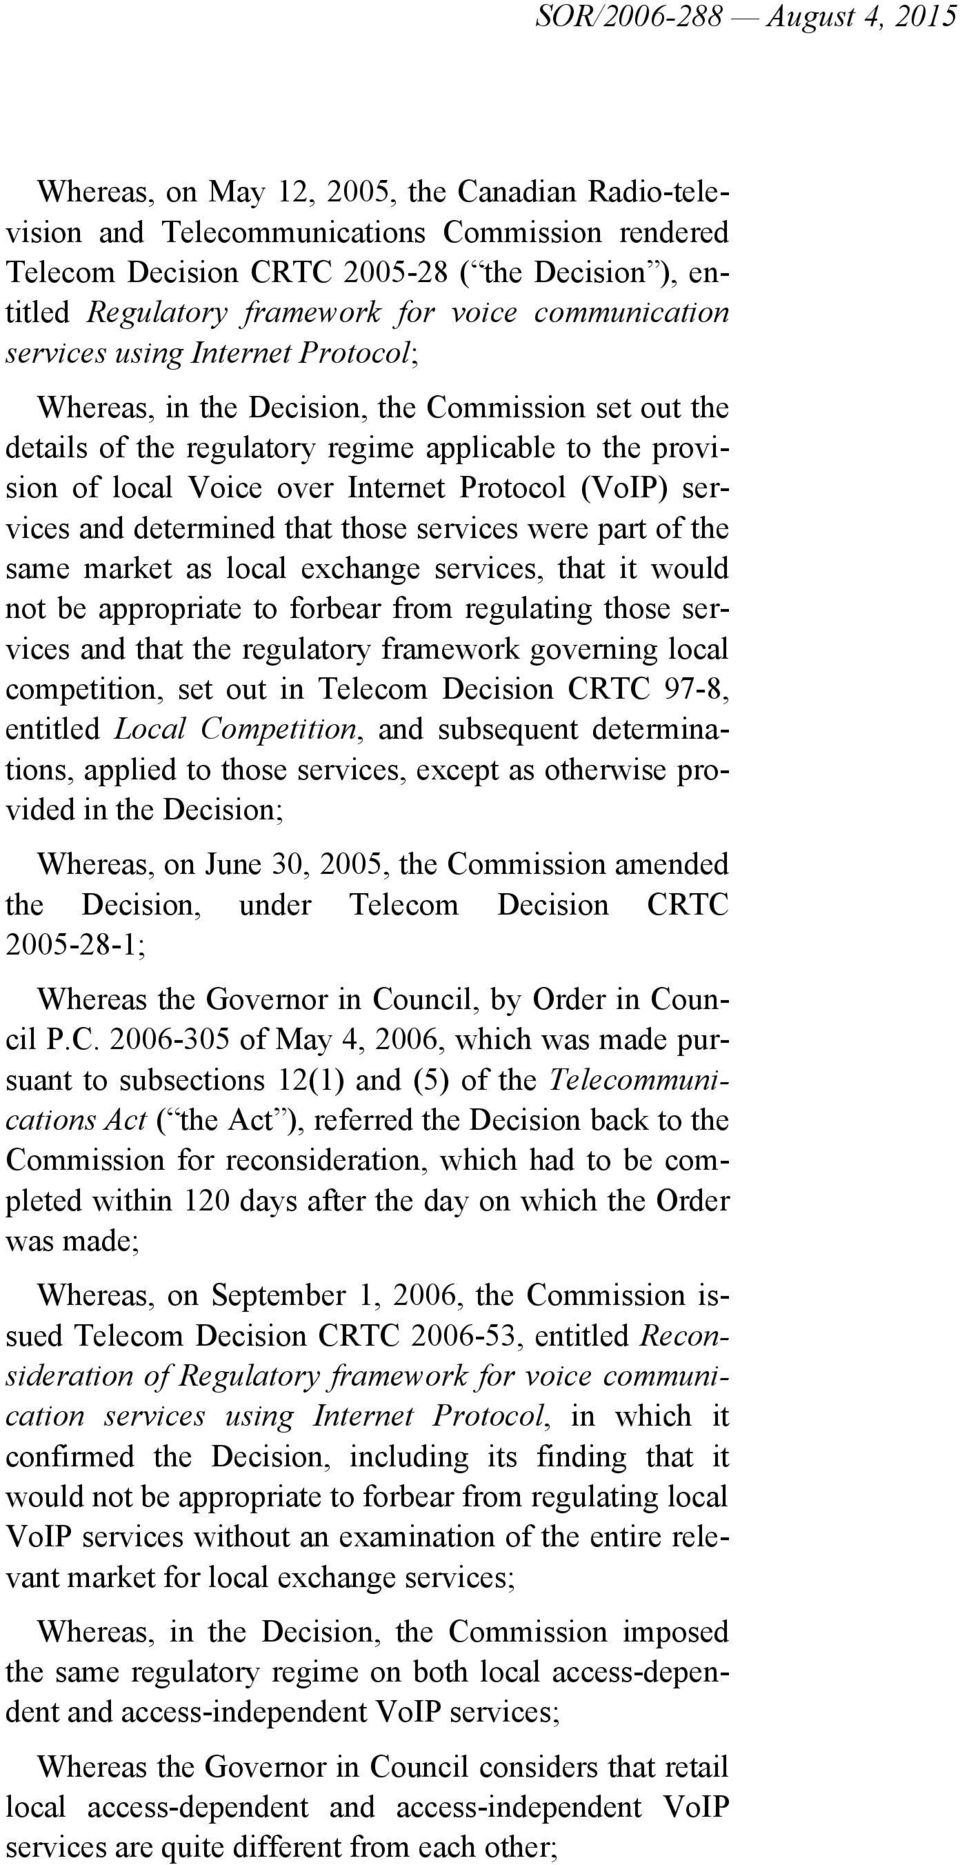 over Internet Protocol (VoIP) services and determined that those services were part of the same market as local exchange services, that it would not be appropriate to forbear from regulating those